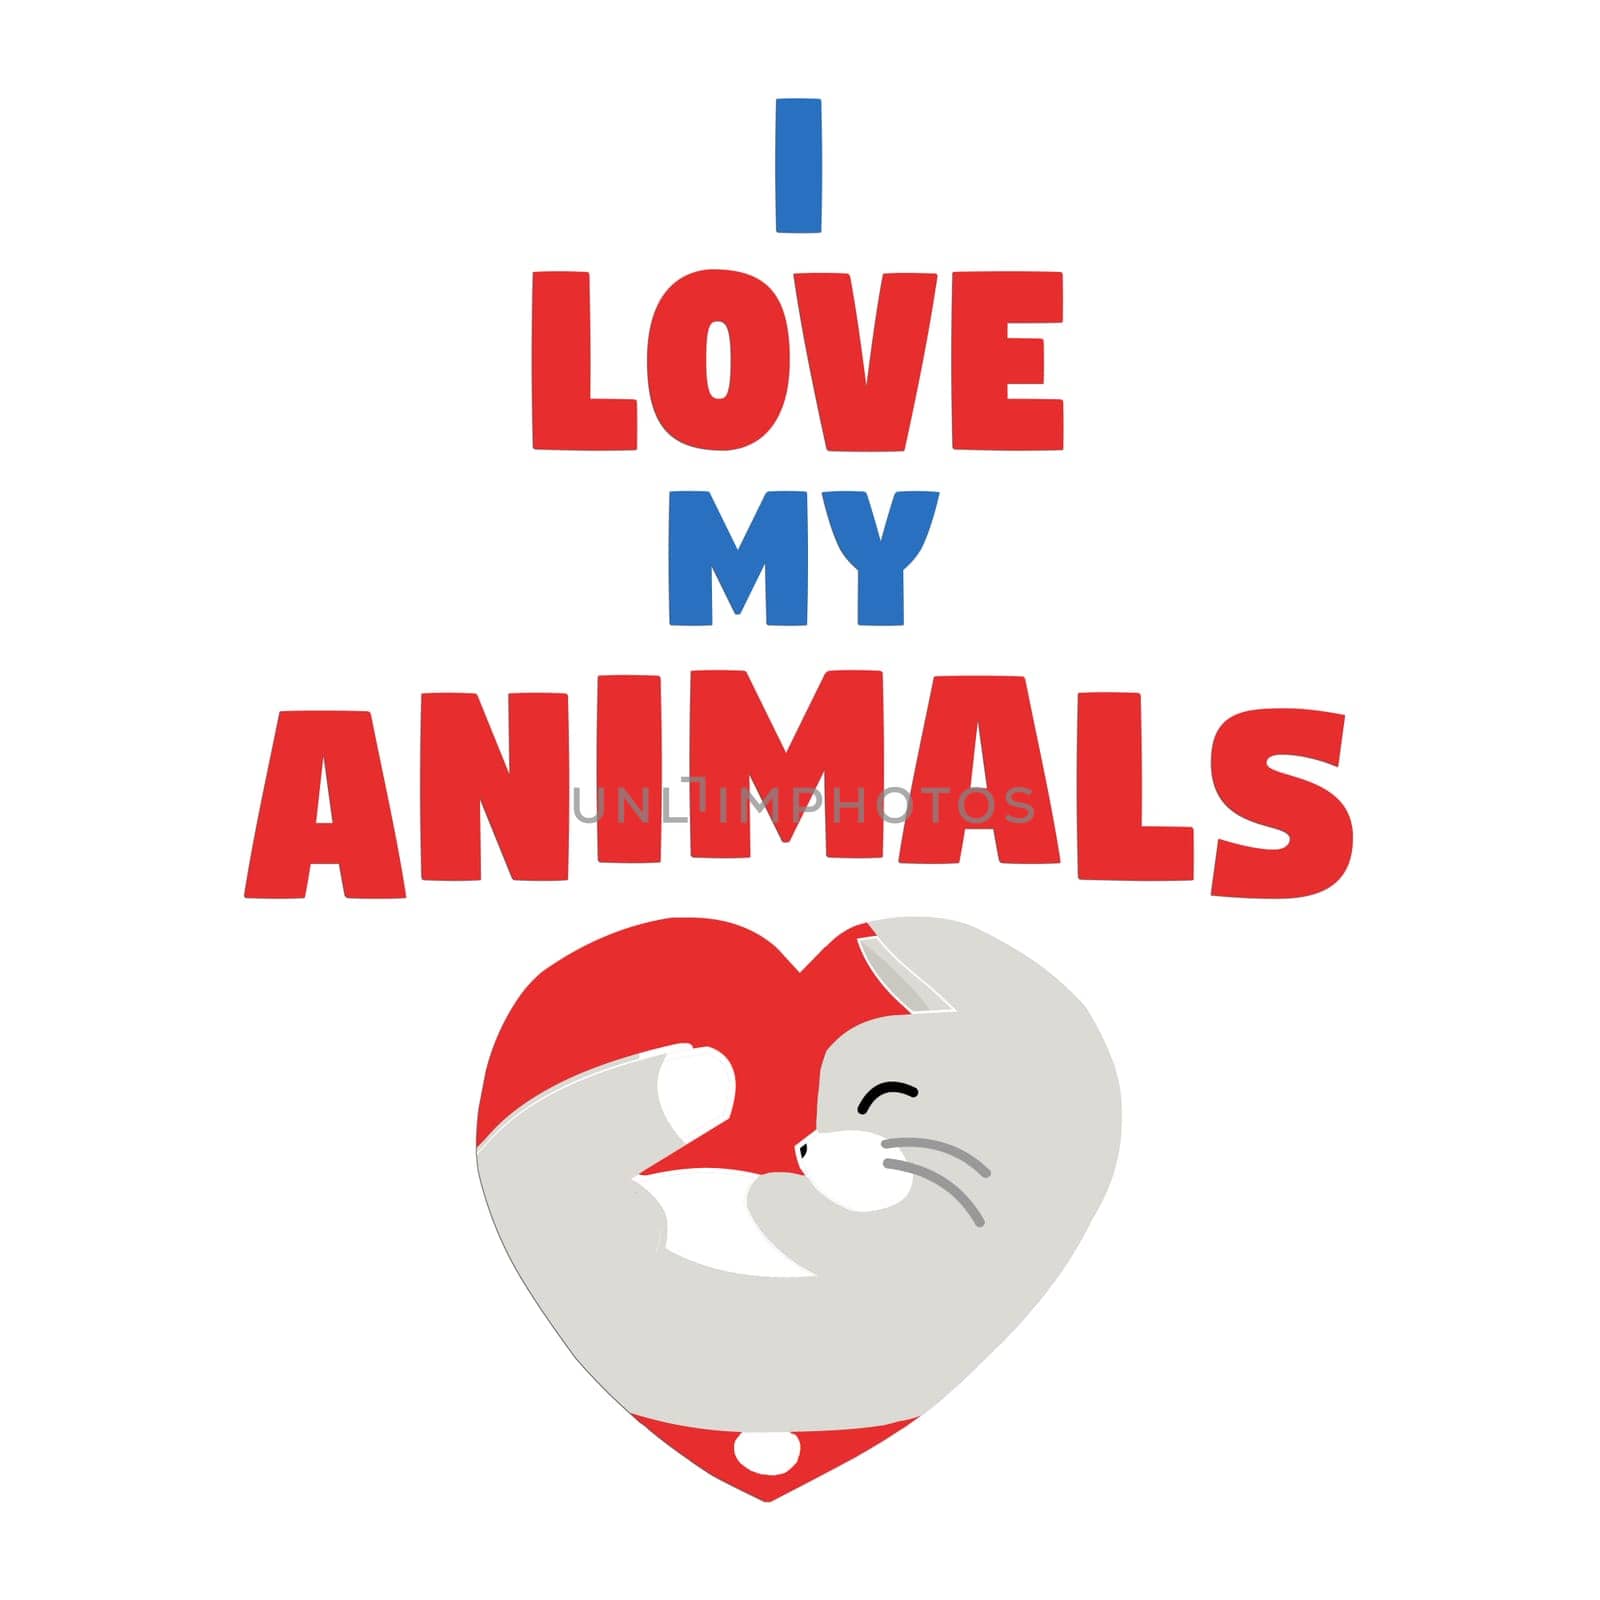 A cute rabbit curled in a heart shape with the text "I love my animals" above.